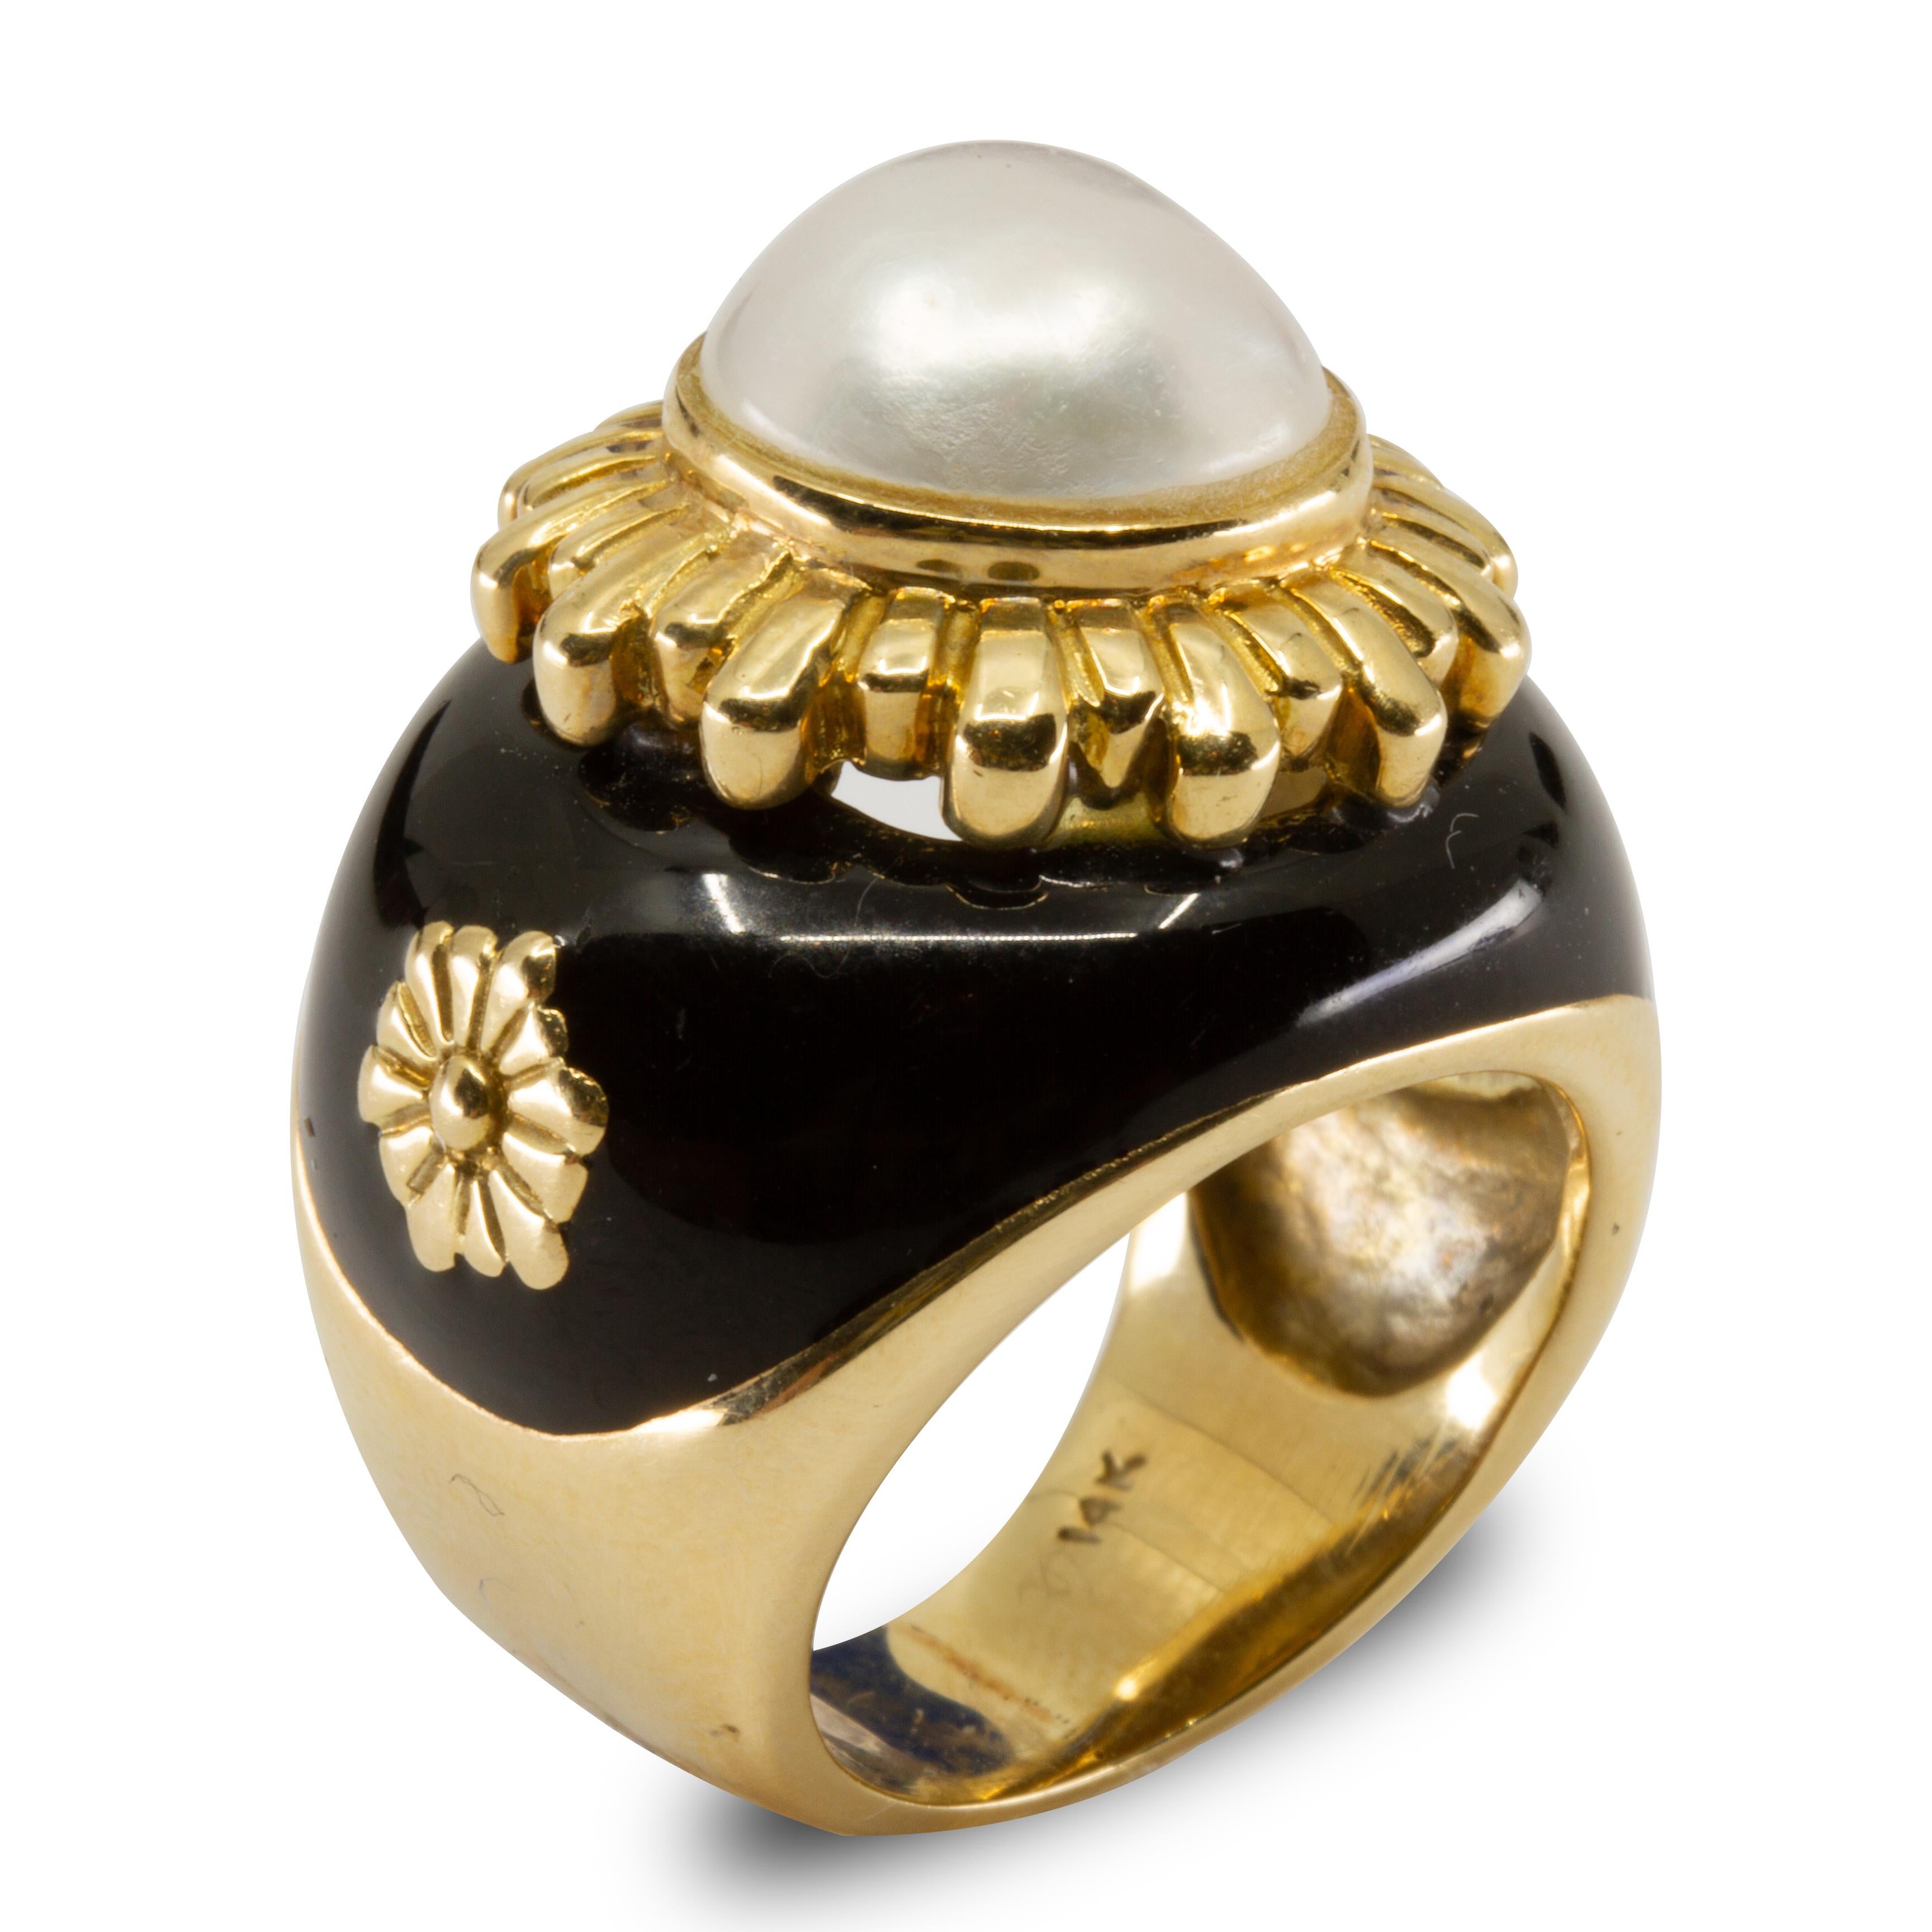 Offered is a 14K Yellow Gold Cultured Mabé Pearl and Enamel Ring size 5.5 11 dwt 